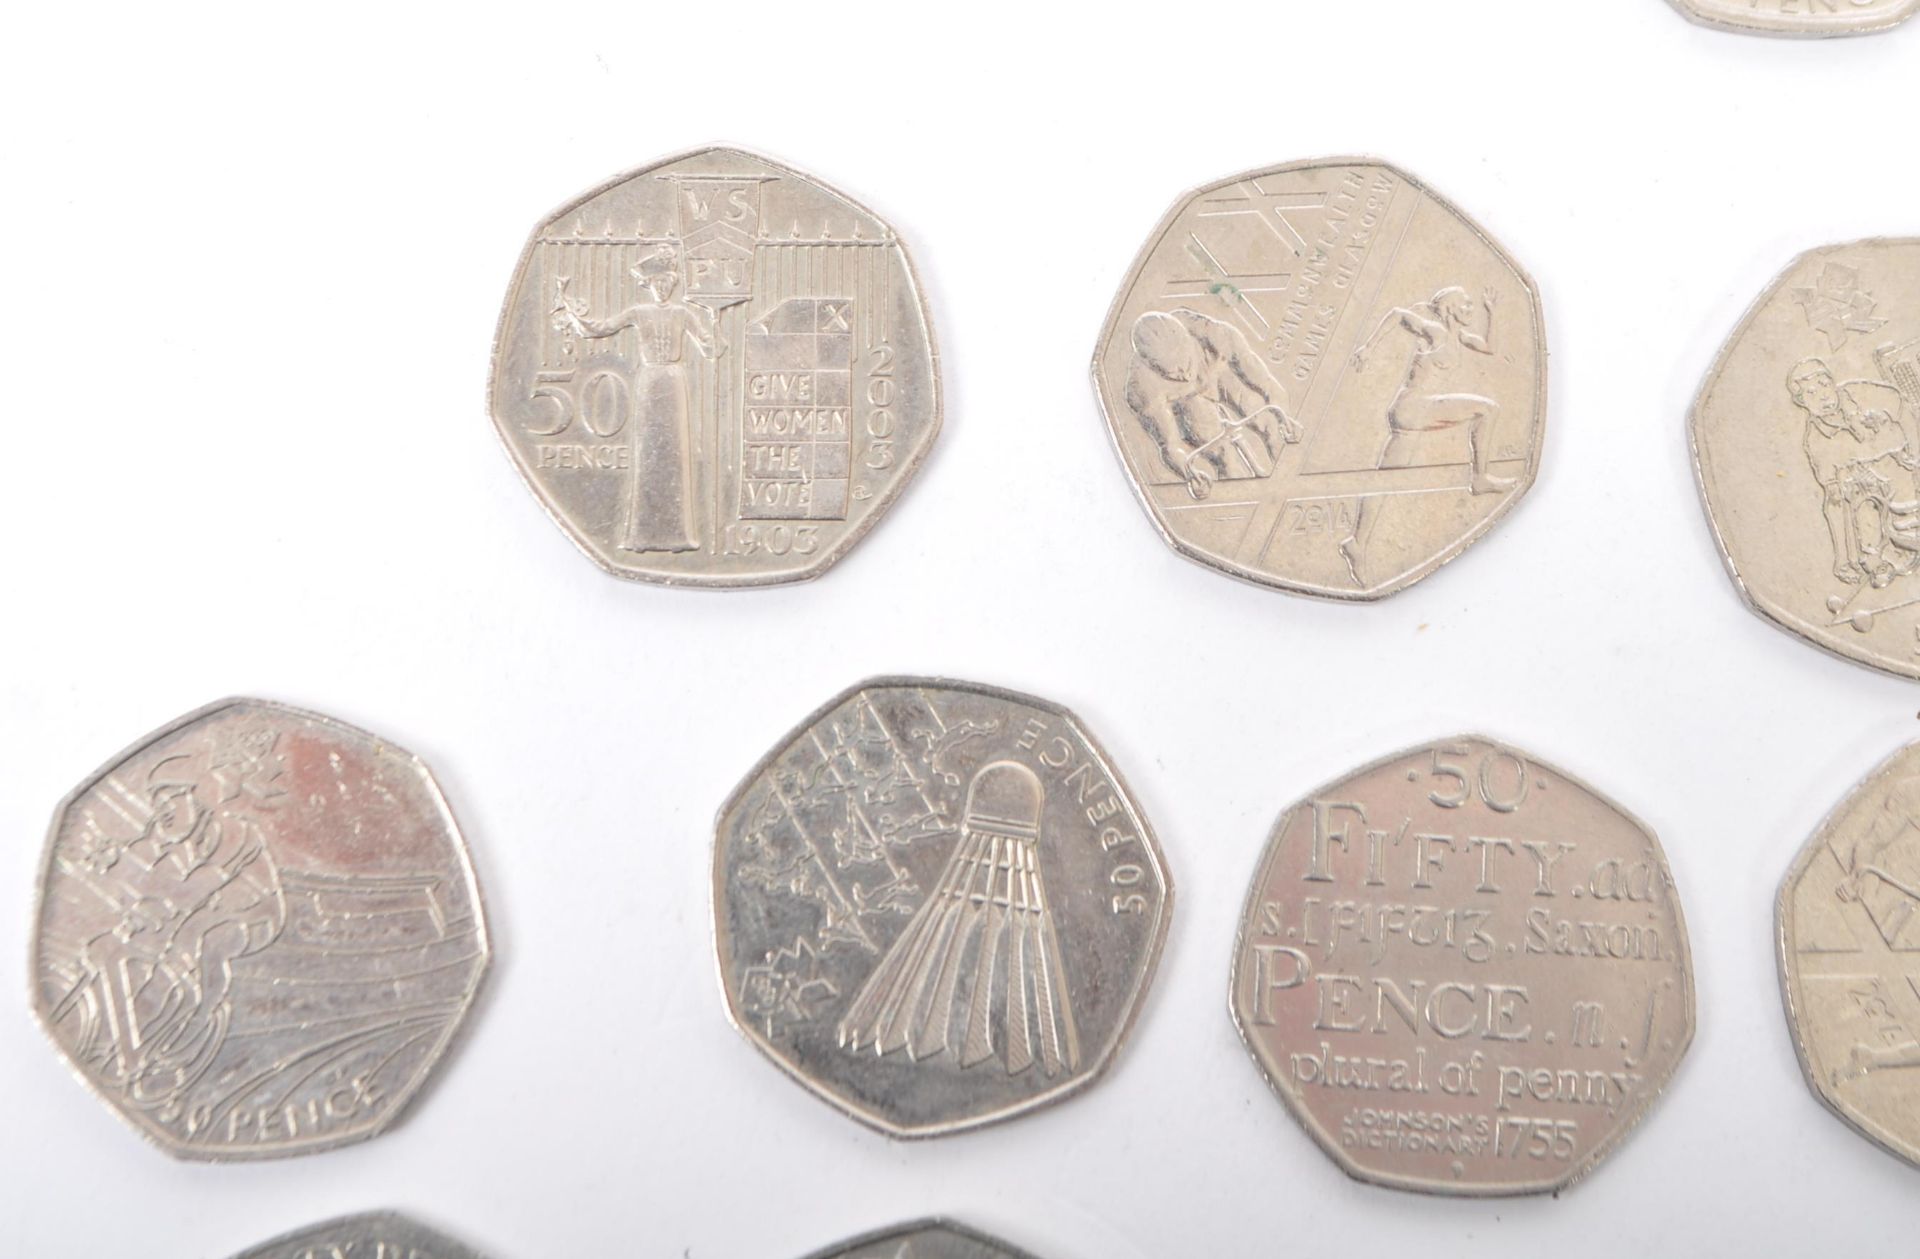 UK CIRCULATED FIFTY PENCE COINS INCL. 2011 FOOTBALL OFFSIDE - Image 5 of 7